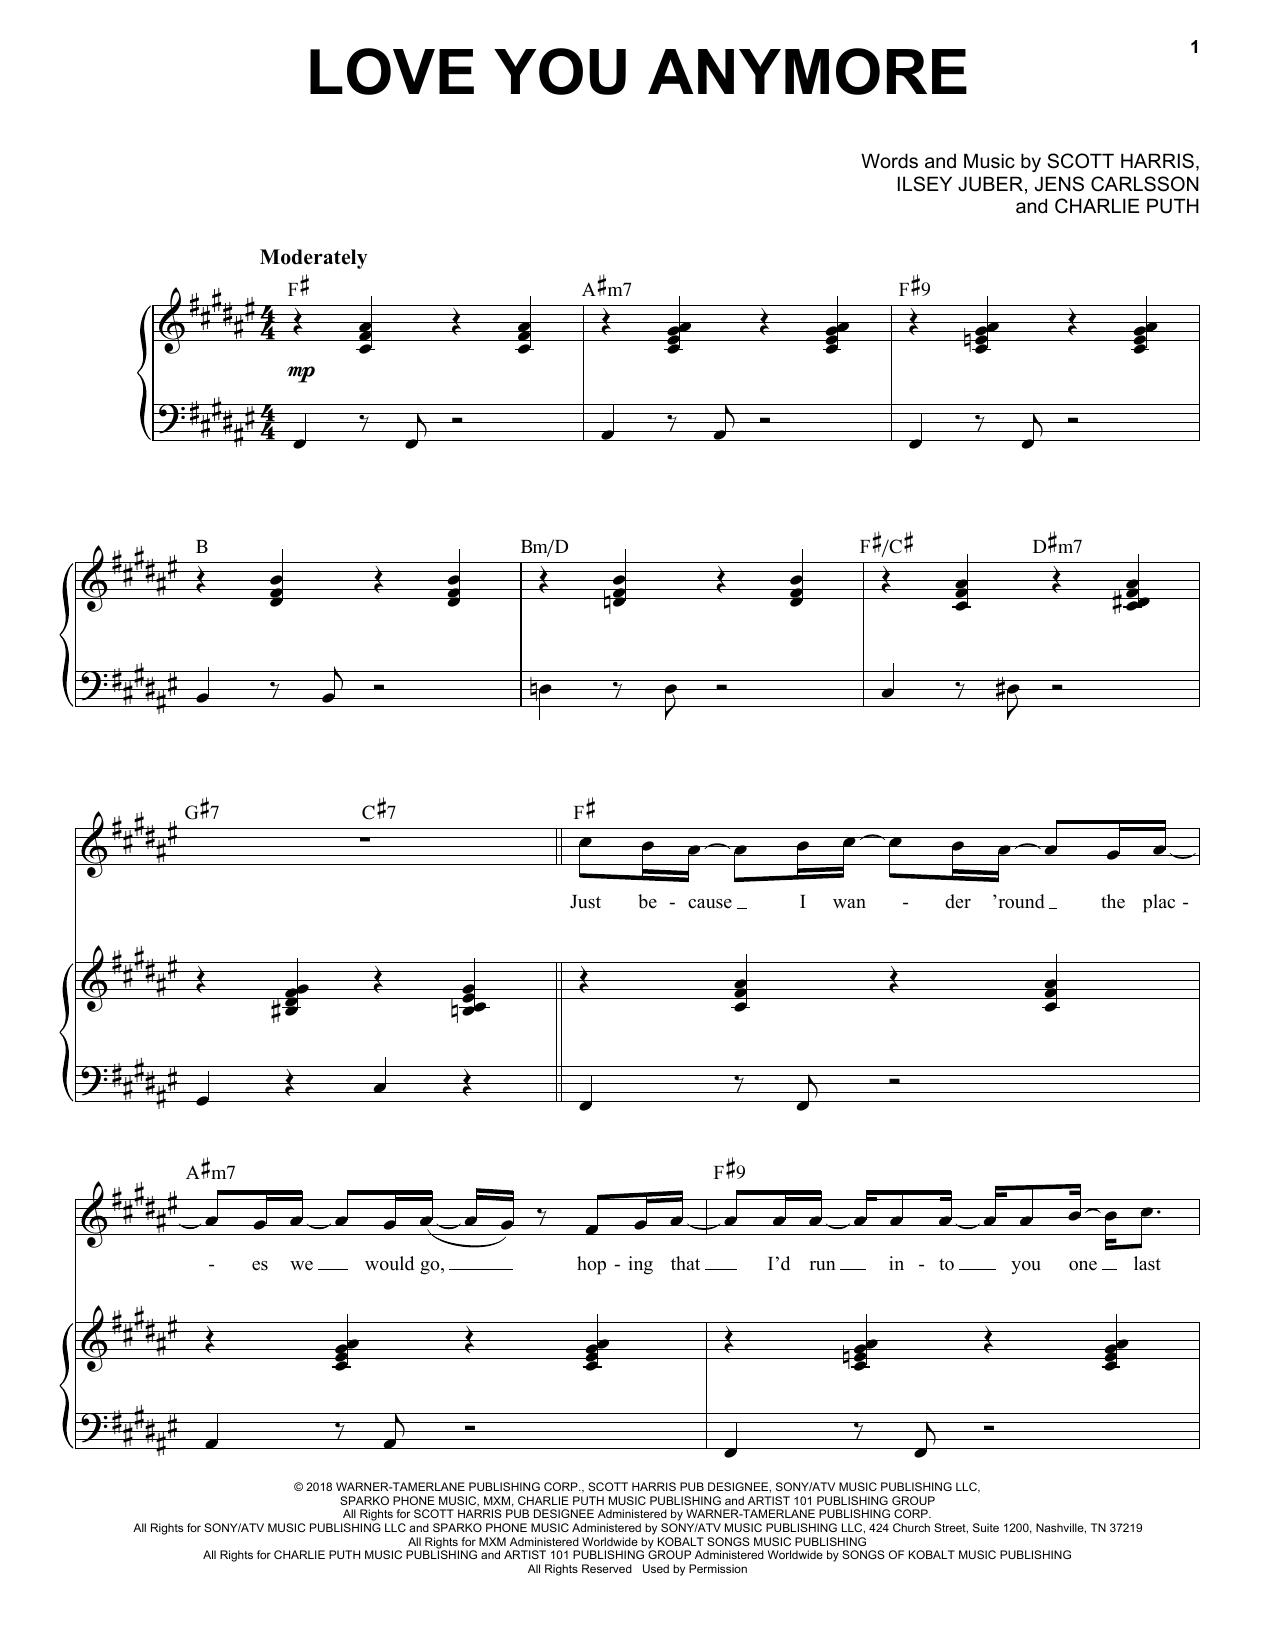 Download Michael Buble Love You Anymore Sheet Music